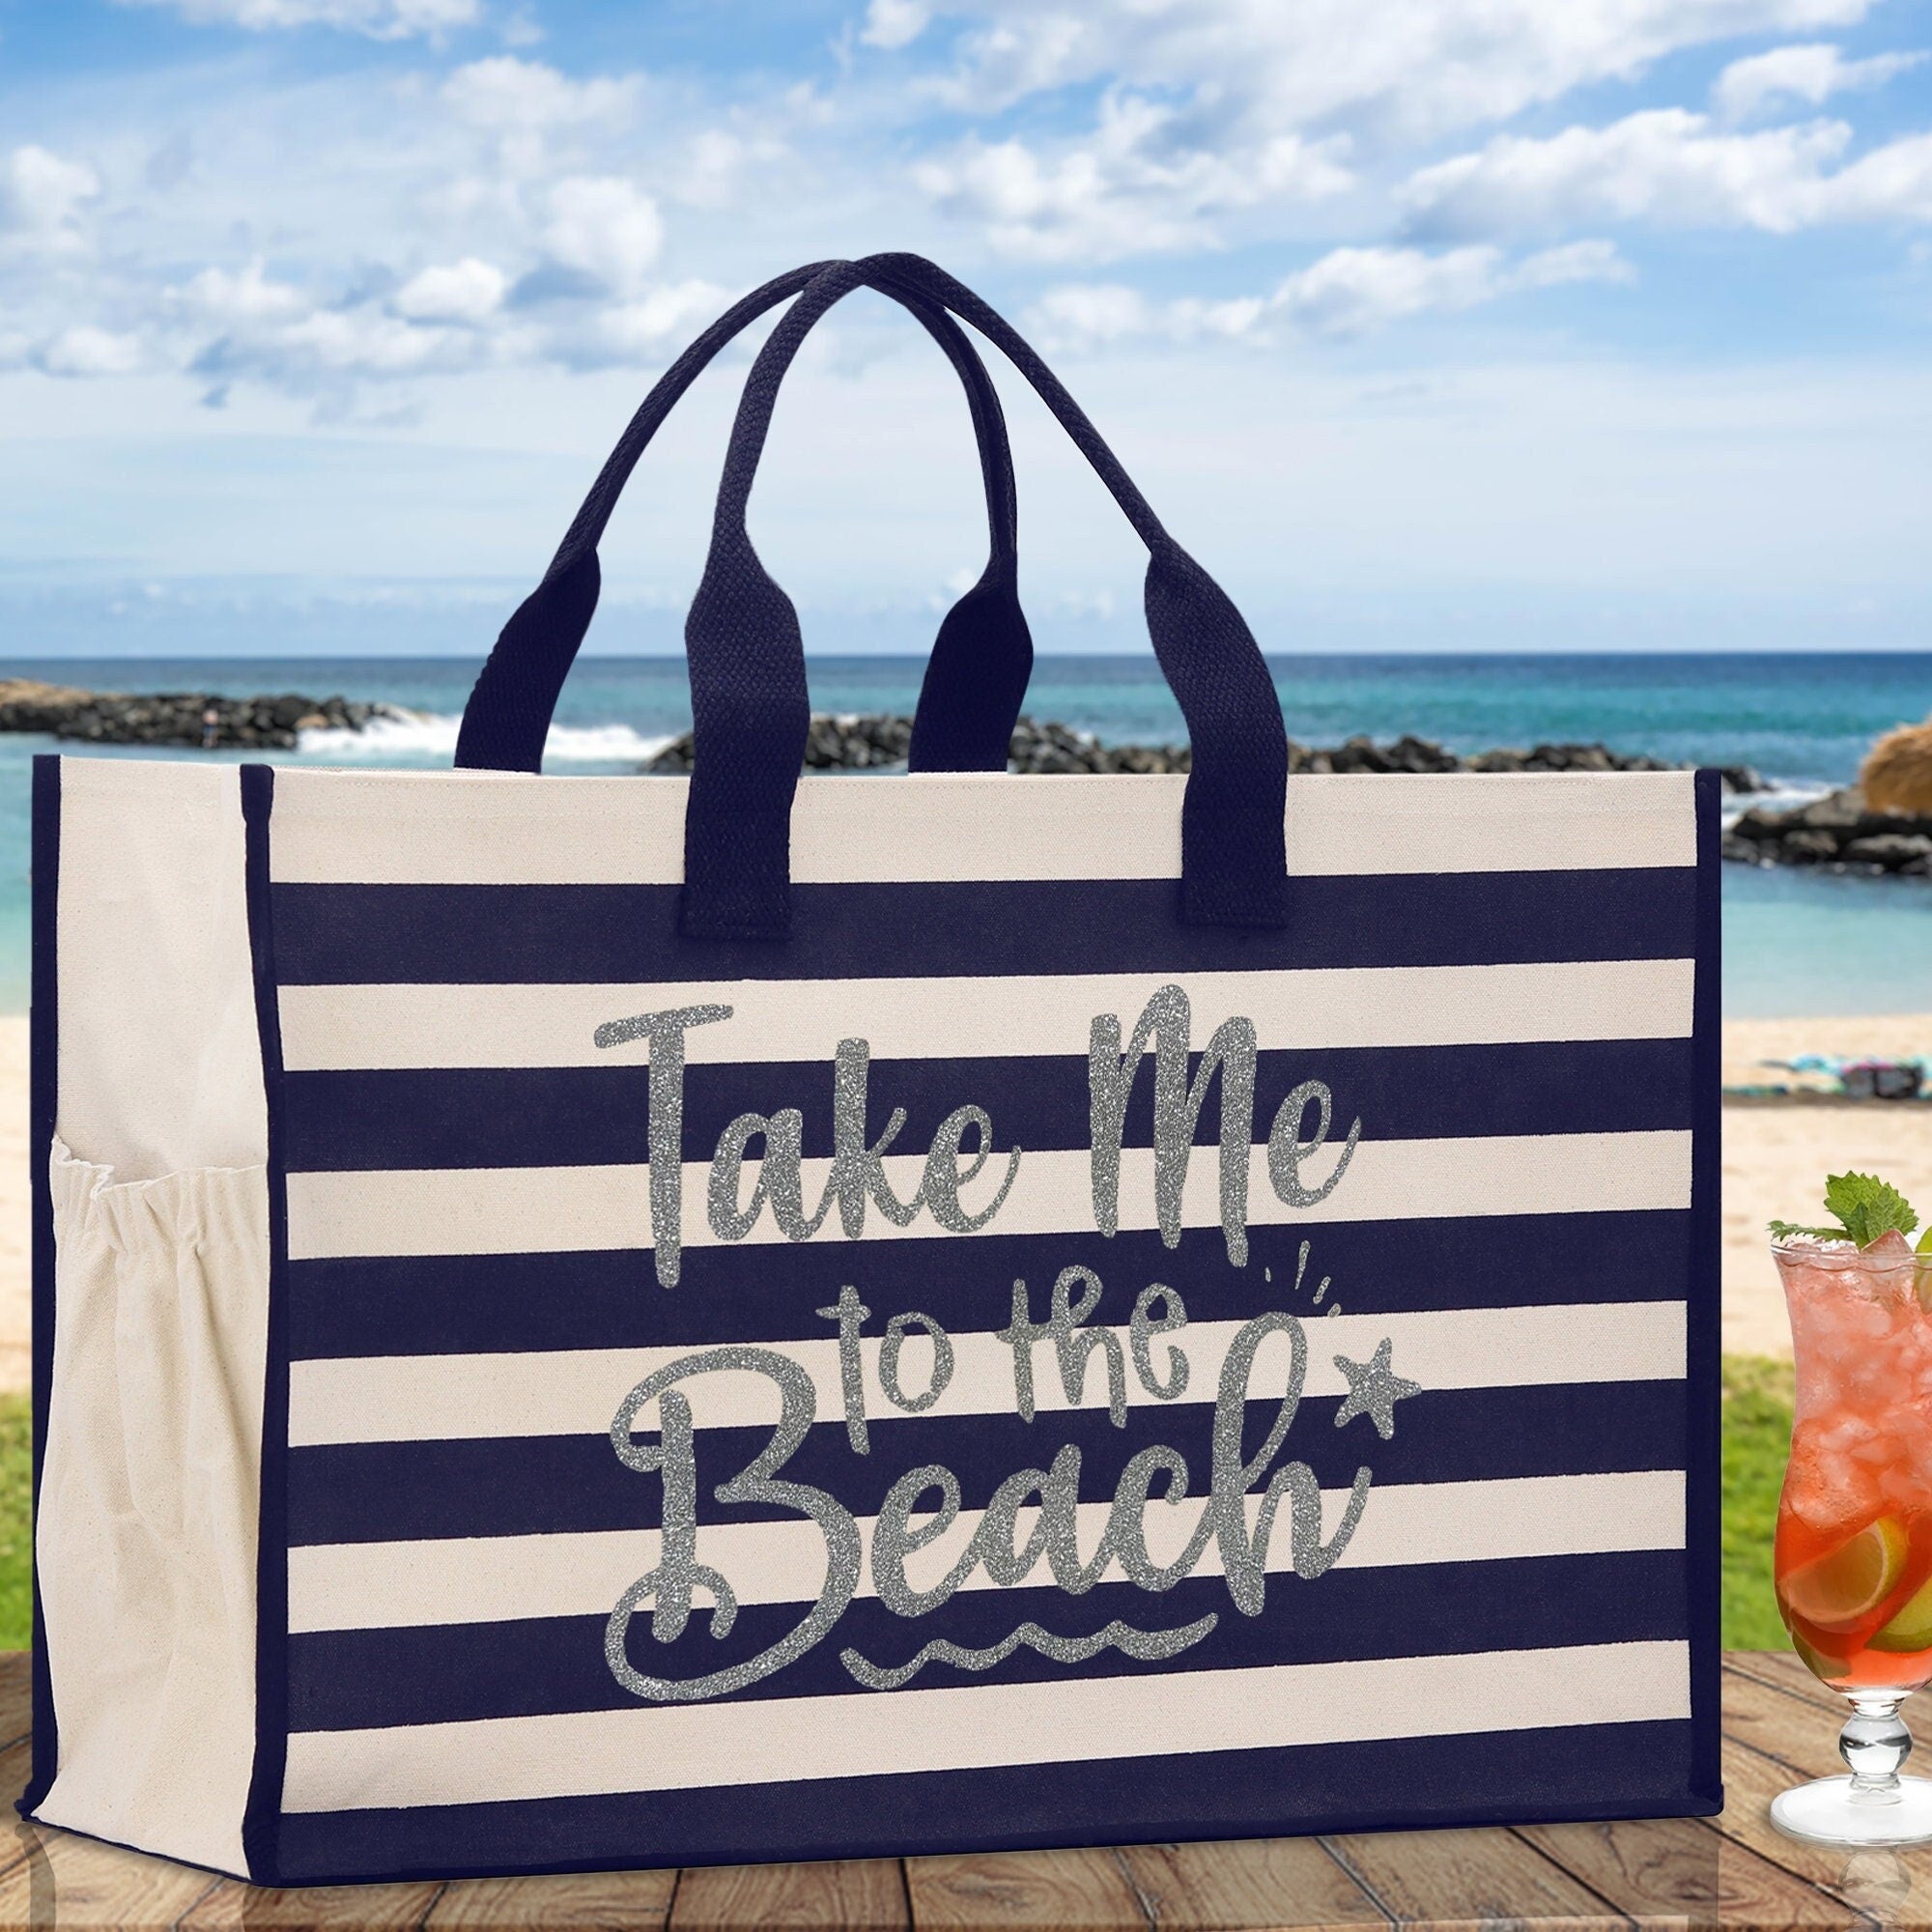 Take Me To The Beach Cabana Tote Bag XL - Oversized Chic Tote Bag with Zipper and Inner Pocket - Beach Bag for Women - Weekender Beach Tote